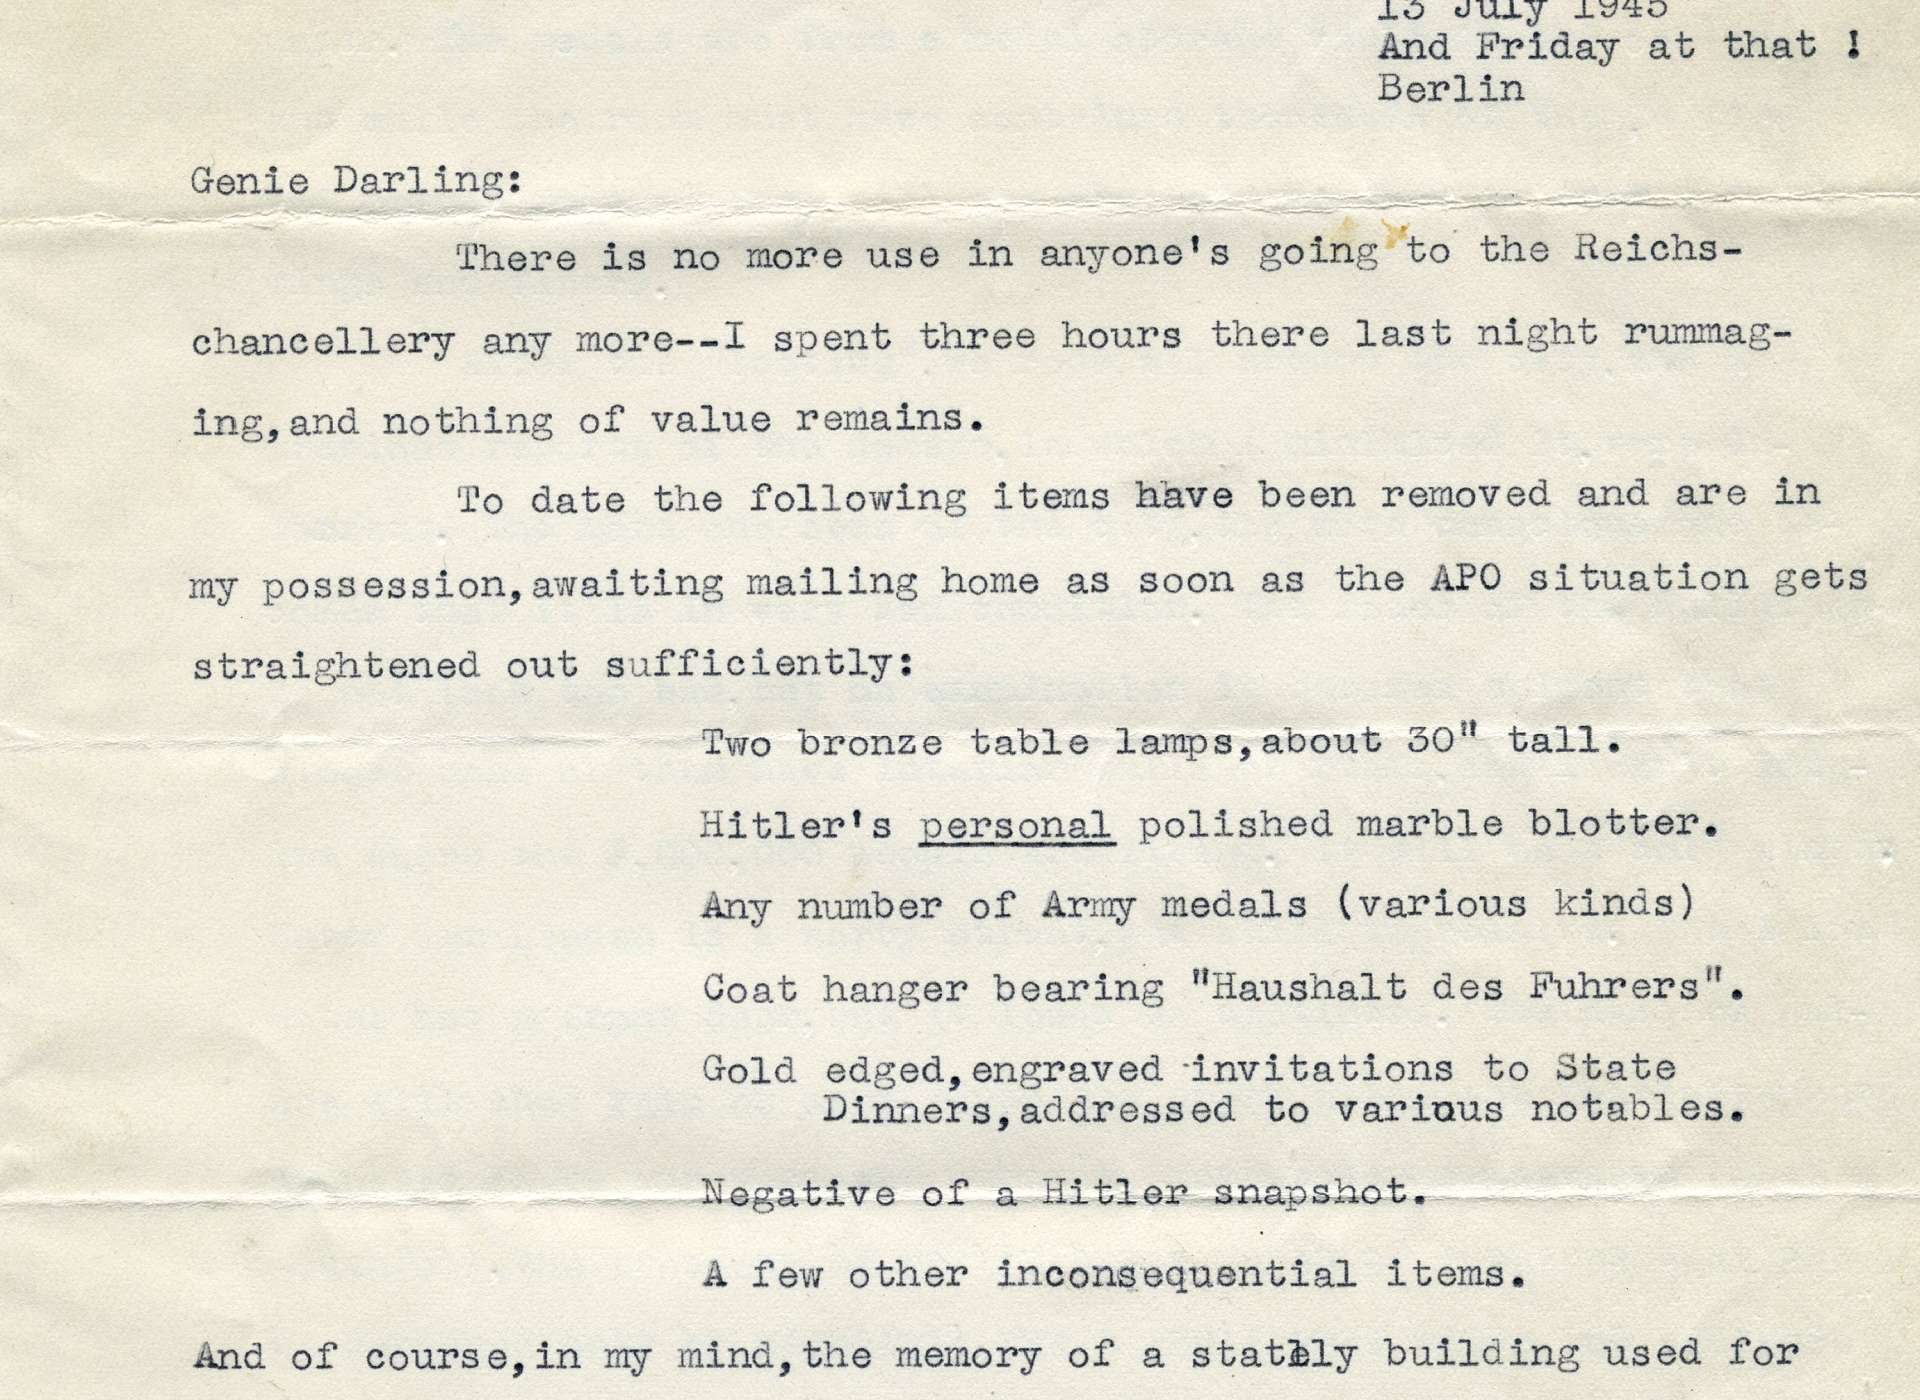 Letter from Larry Hirshbach to his wife from the Reich Chancellery